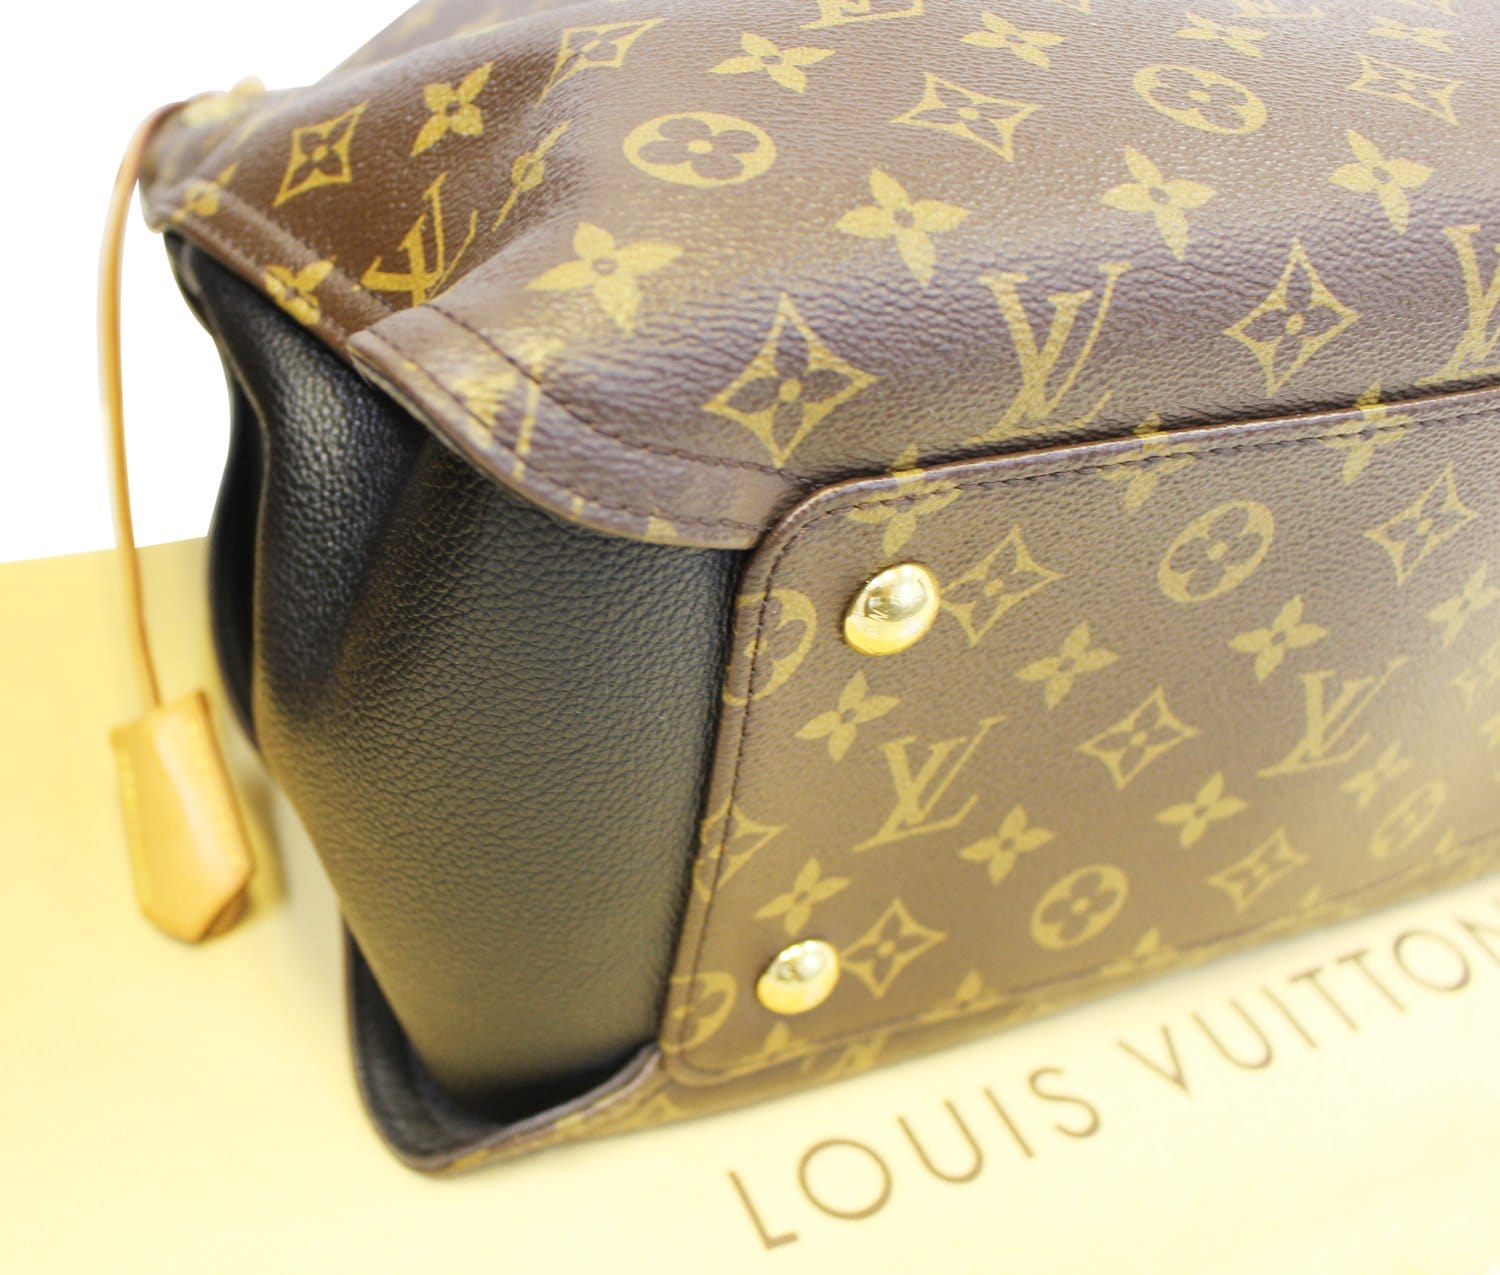 Best Authentic Louis Vuitton Neverfull Mm. Layaway & Authentication. for  sale in McDonough, Georgia for 2023